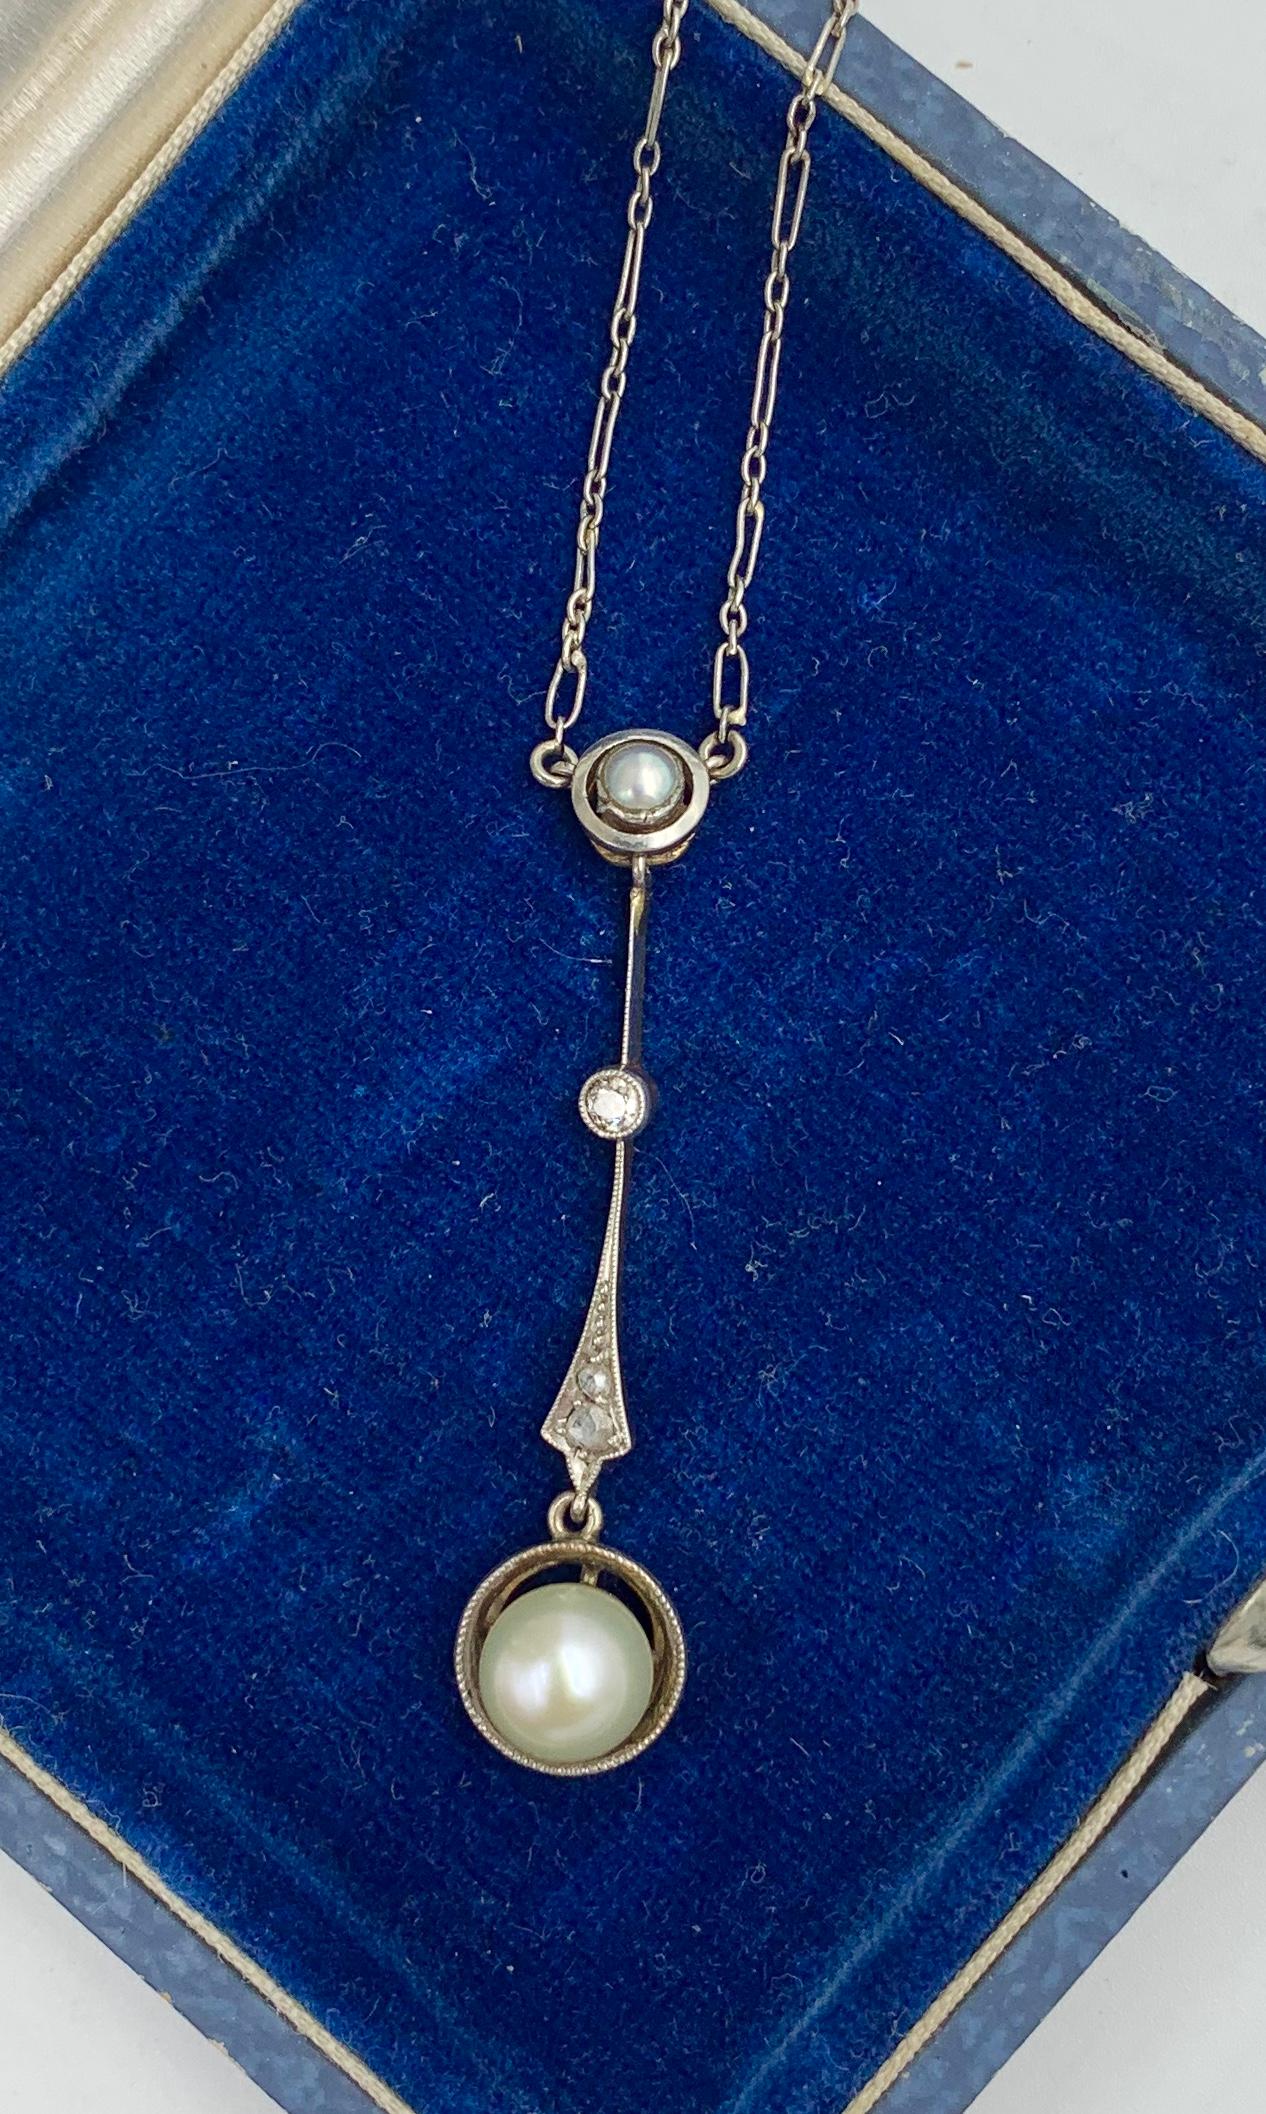 This is a beautiful Edwardian - Art Deco Pendant Necklace with Old Mine and Rose Cut Diamonds with gorgeous Pearls all set in Platinum with a Platinum link chain.  The wonderful knife edge pendant has stunning classic design with clean lines and